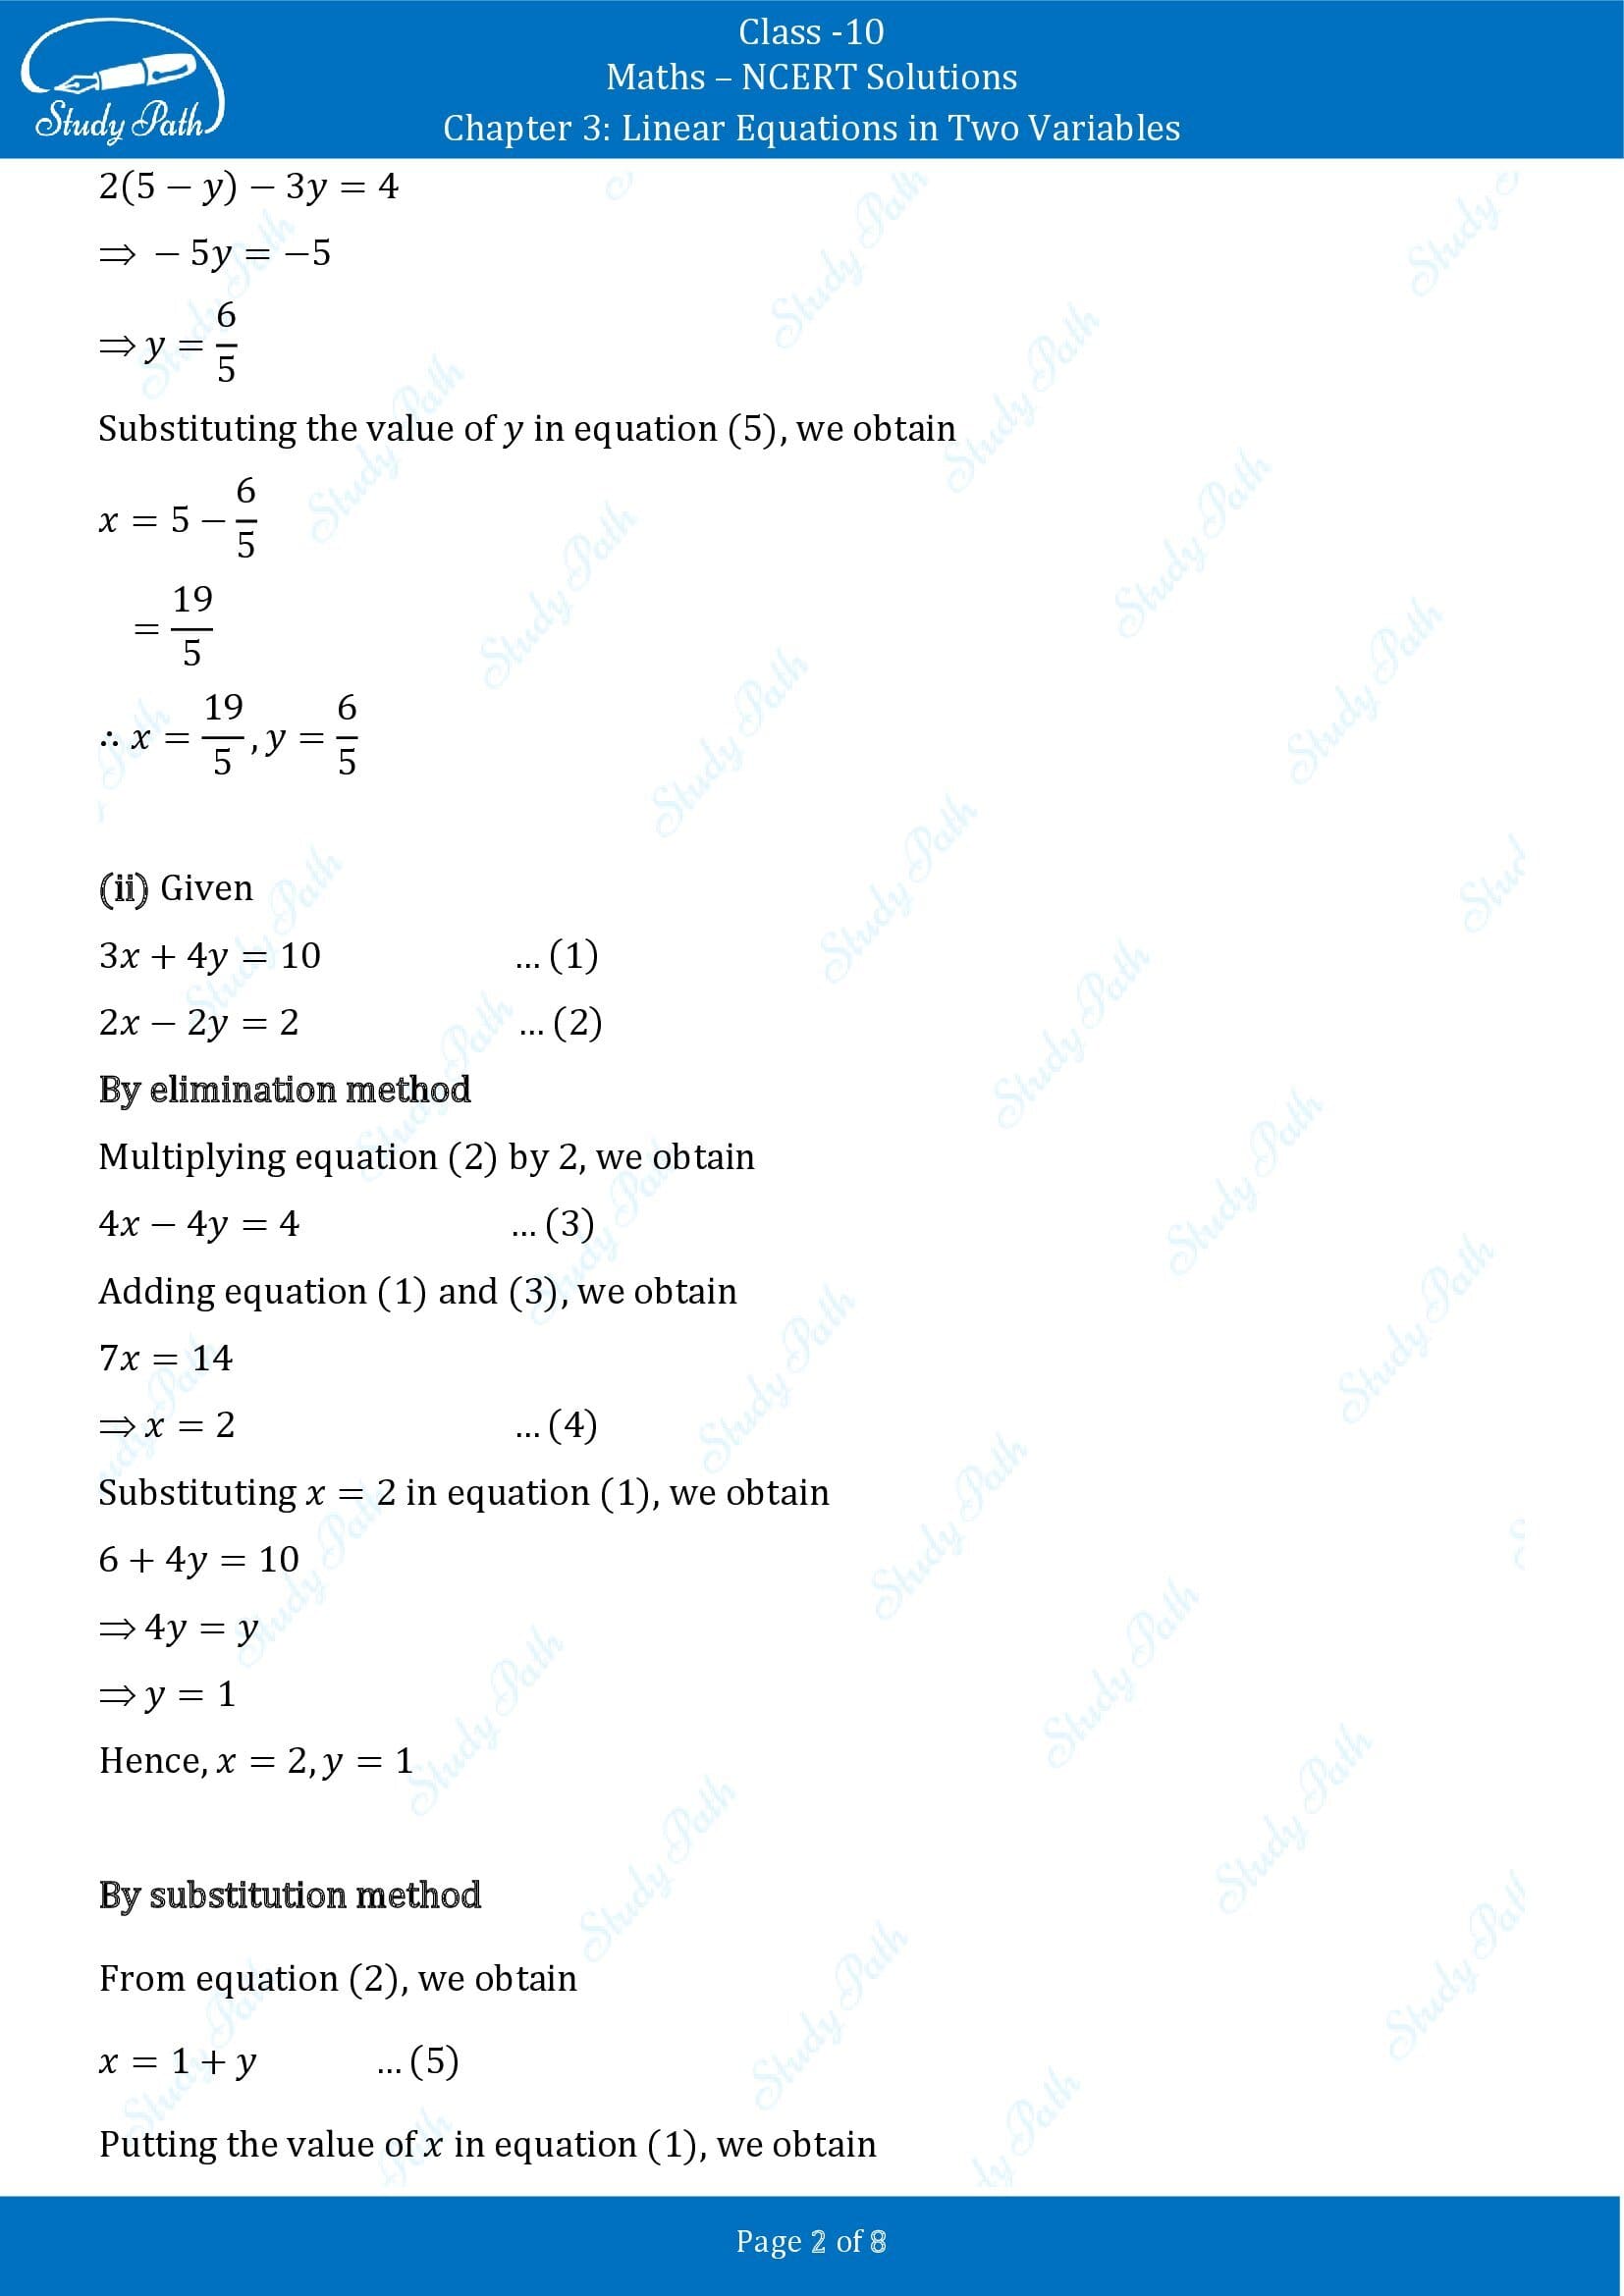 NCERT Solutions for Class 10 Maths Chapter 3 Linear Equations in Two Variables Exercise 3.4 00002